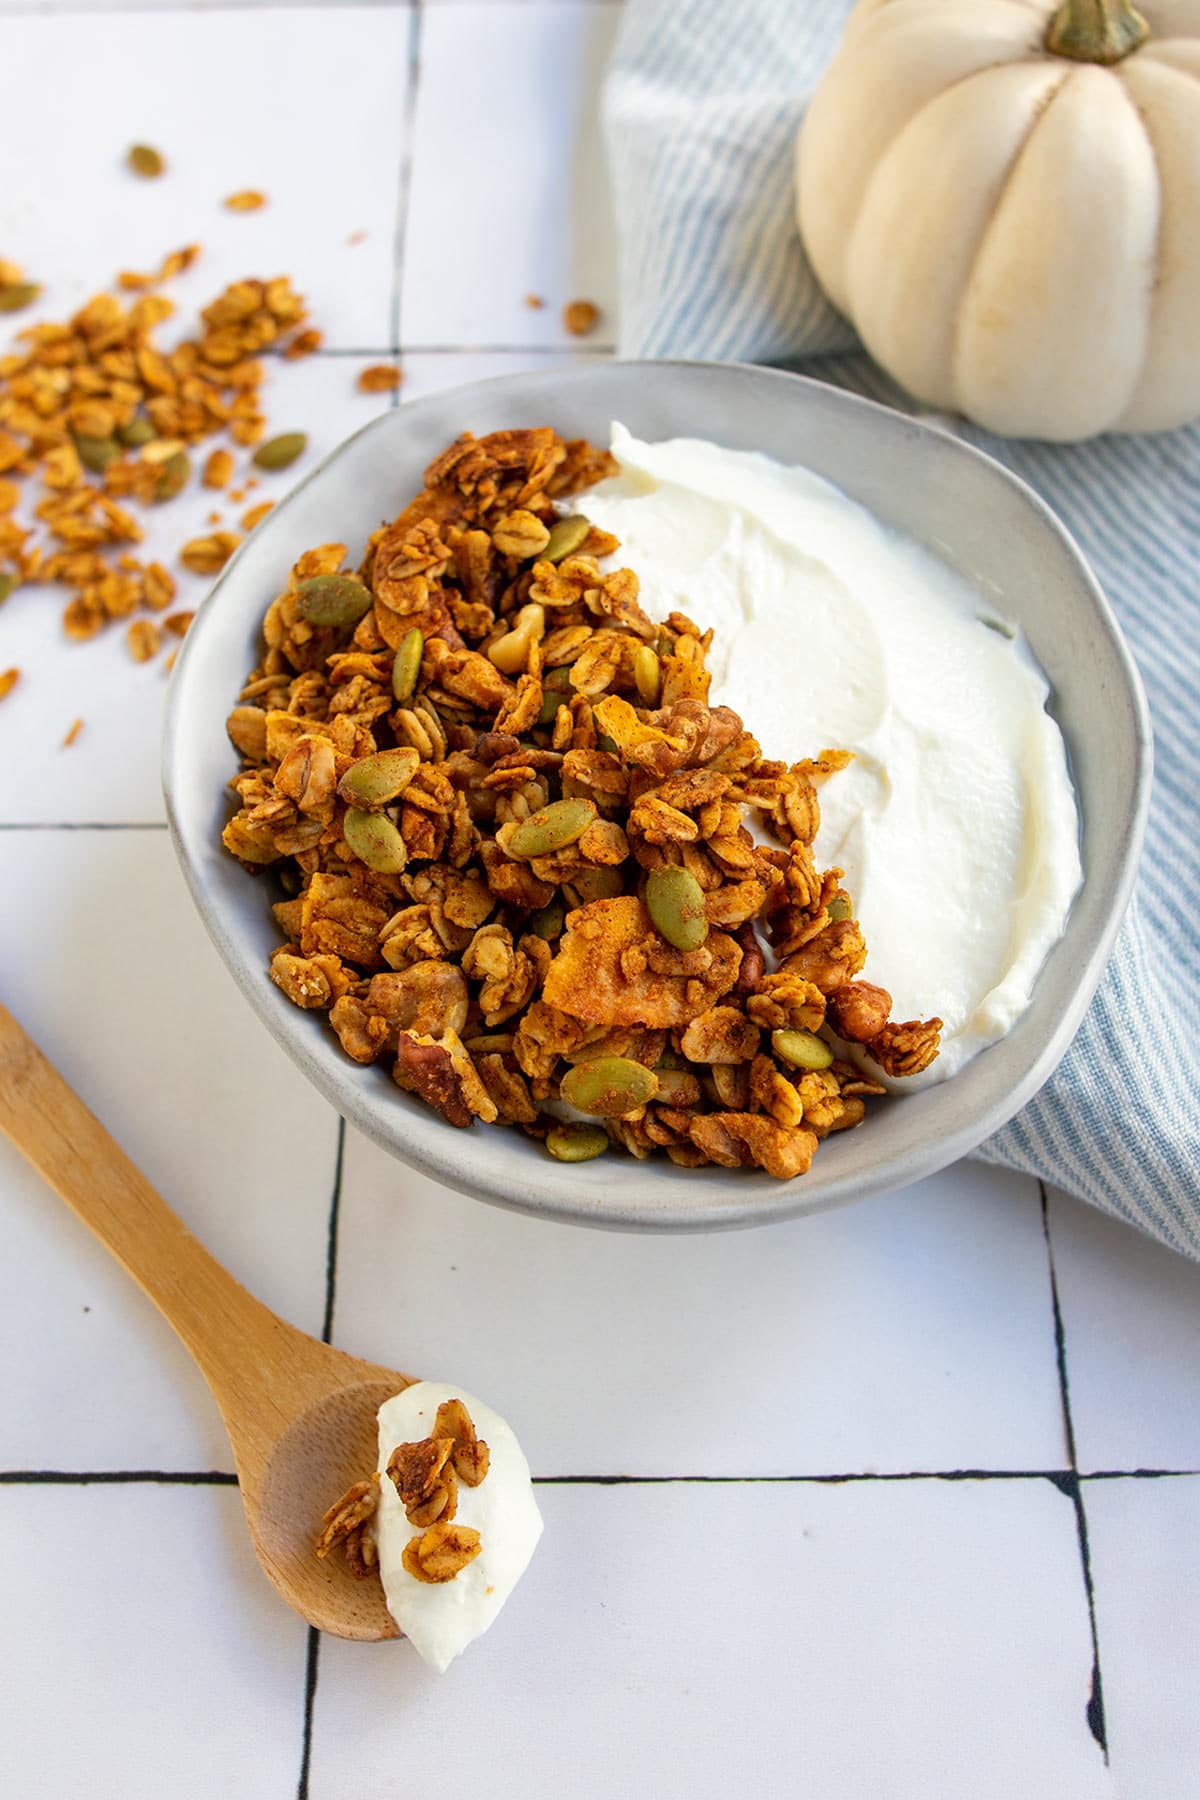 Yogurt and granola in grey bowl with white pumpkin and wooden spoon.